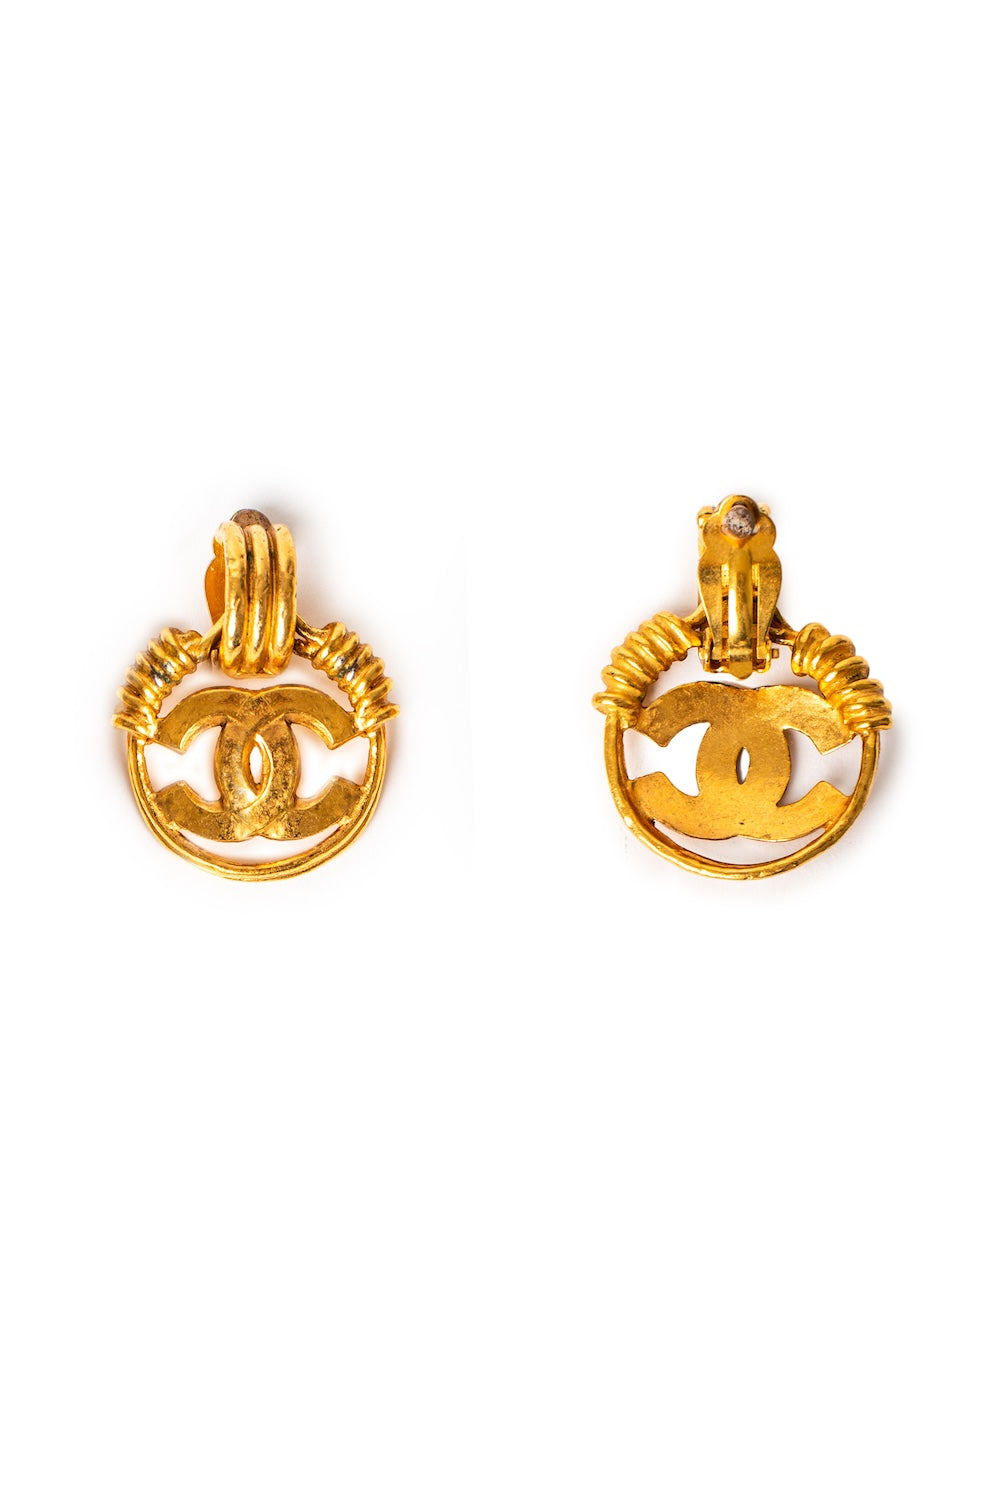 Chanel <br> 94P CC logo gold plated baroque hoop earrings